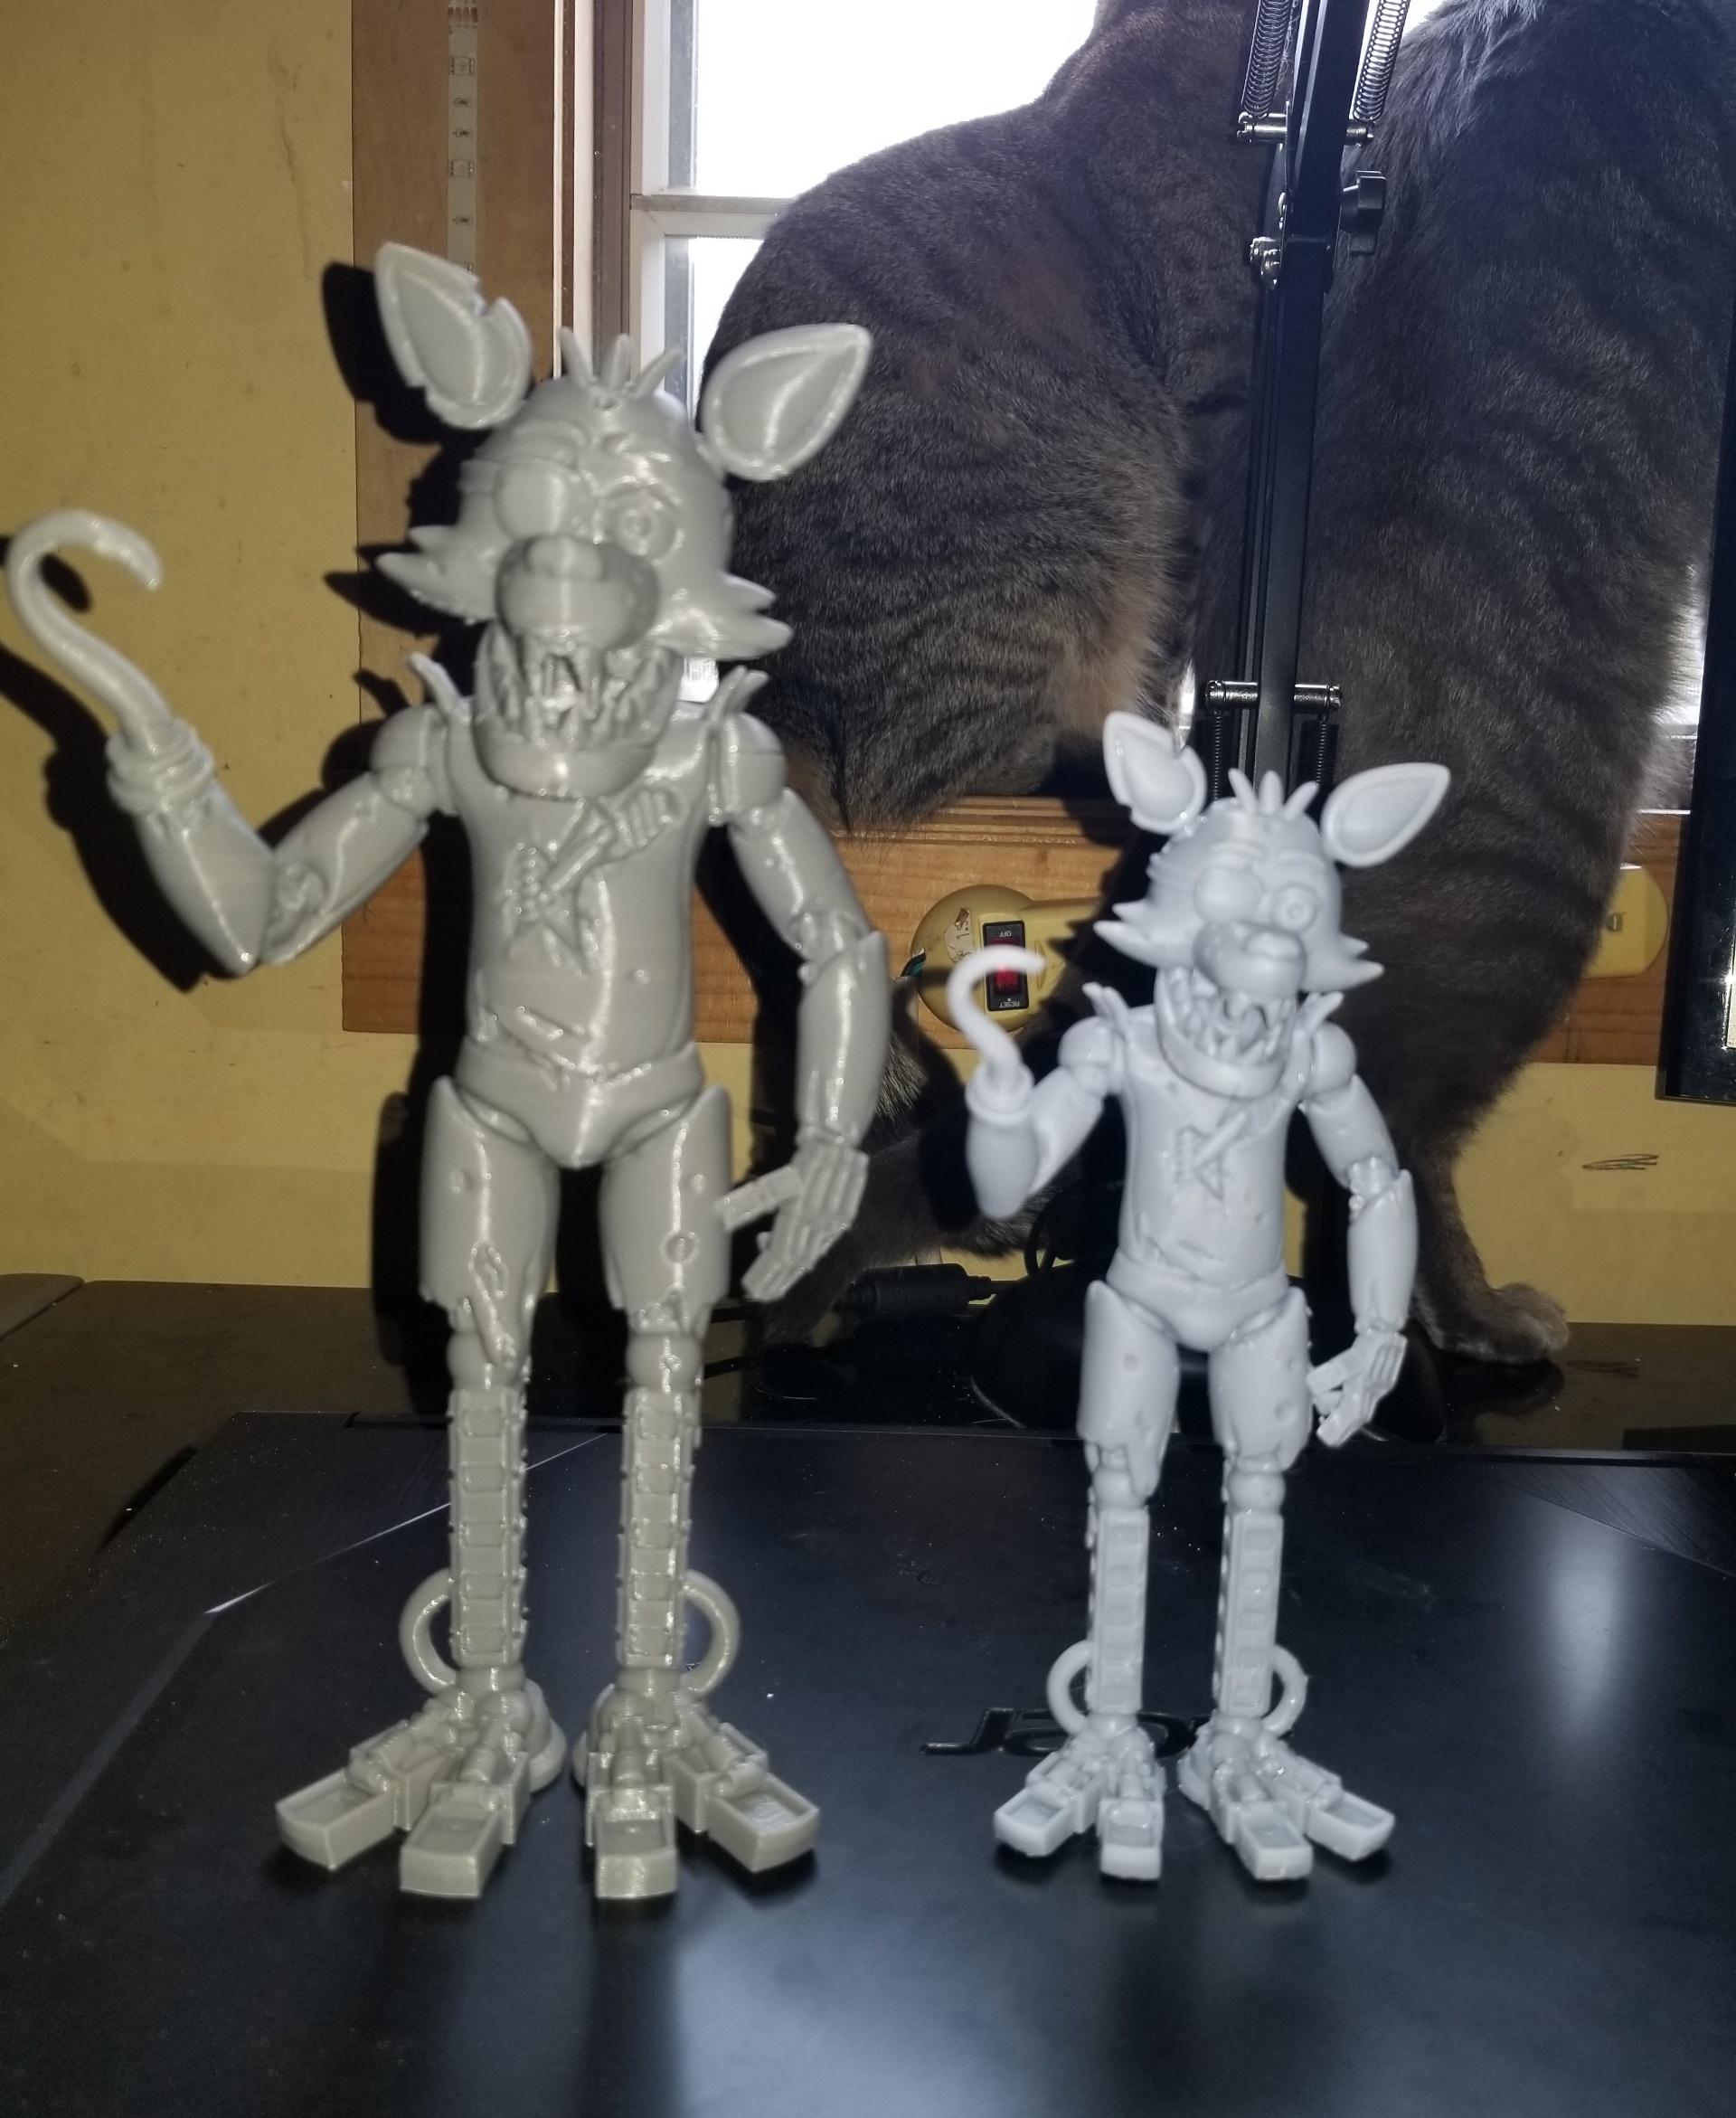 Foxy  - Left on Anycubic Kobra 2 @ 100%, right on Anycubic Photon Mono 4K @ 70% - 3d model